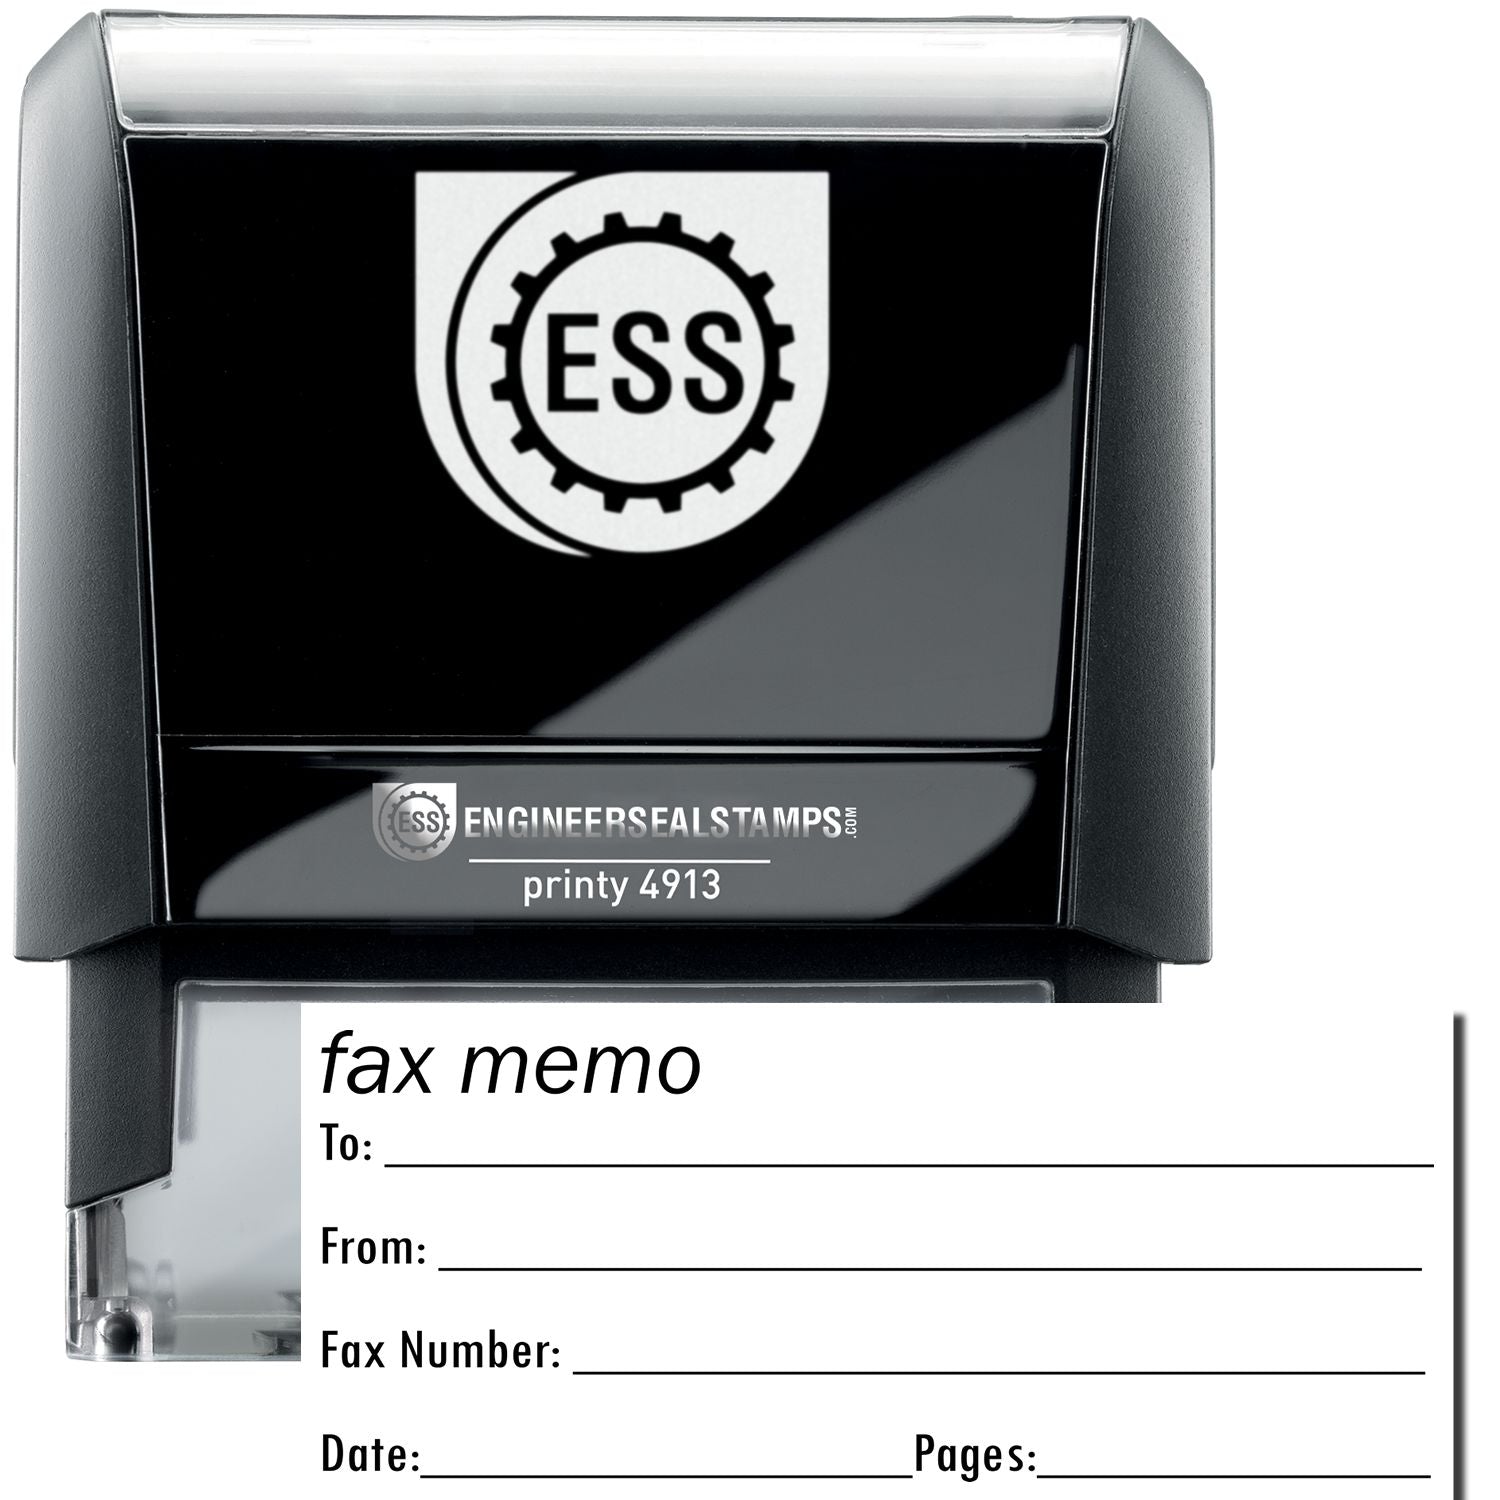 A self-inking stamp with a stamped image showing how the text "fax memo" horizontally is displayed by it. It also displays a small form under it in which the details like Fax To, Fax Number, Fax From, Date, and Pages can be mentioned.